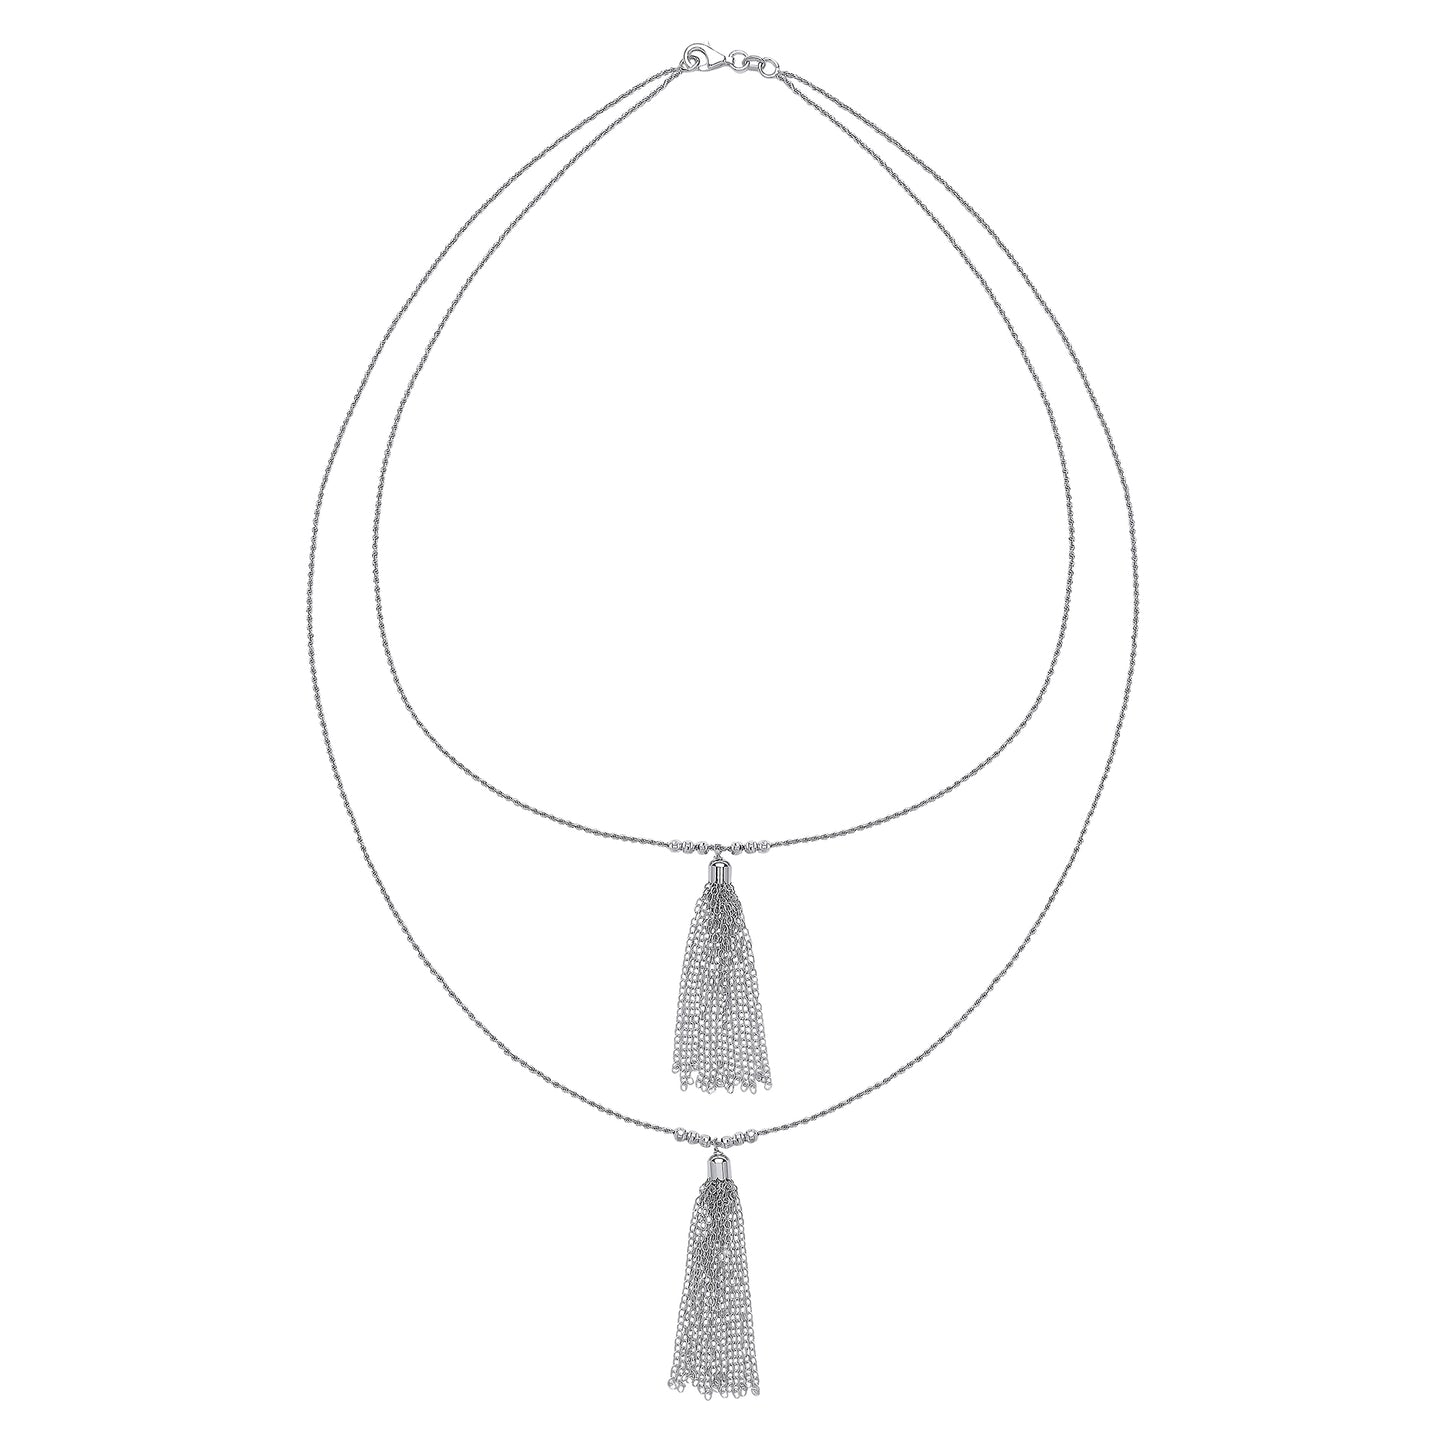 Silver  Waterfall Tassle Double Drop Necklace 20 inch - GVK181